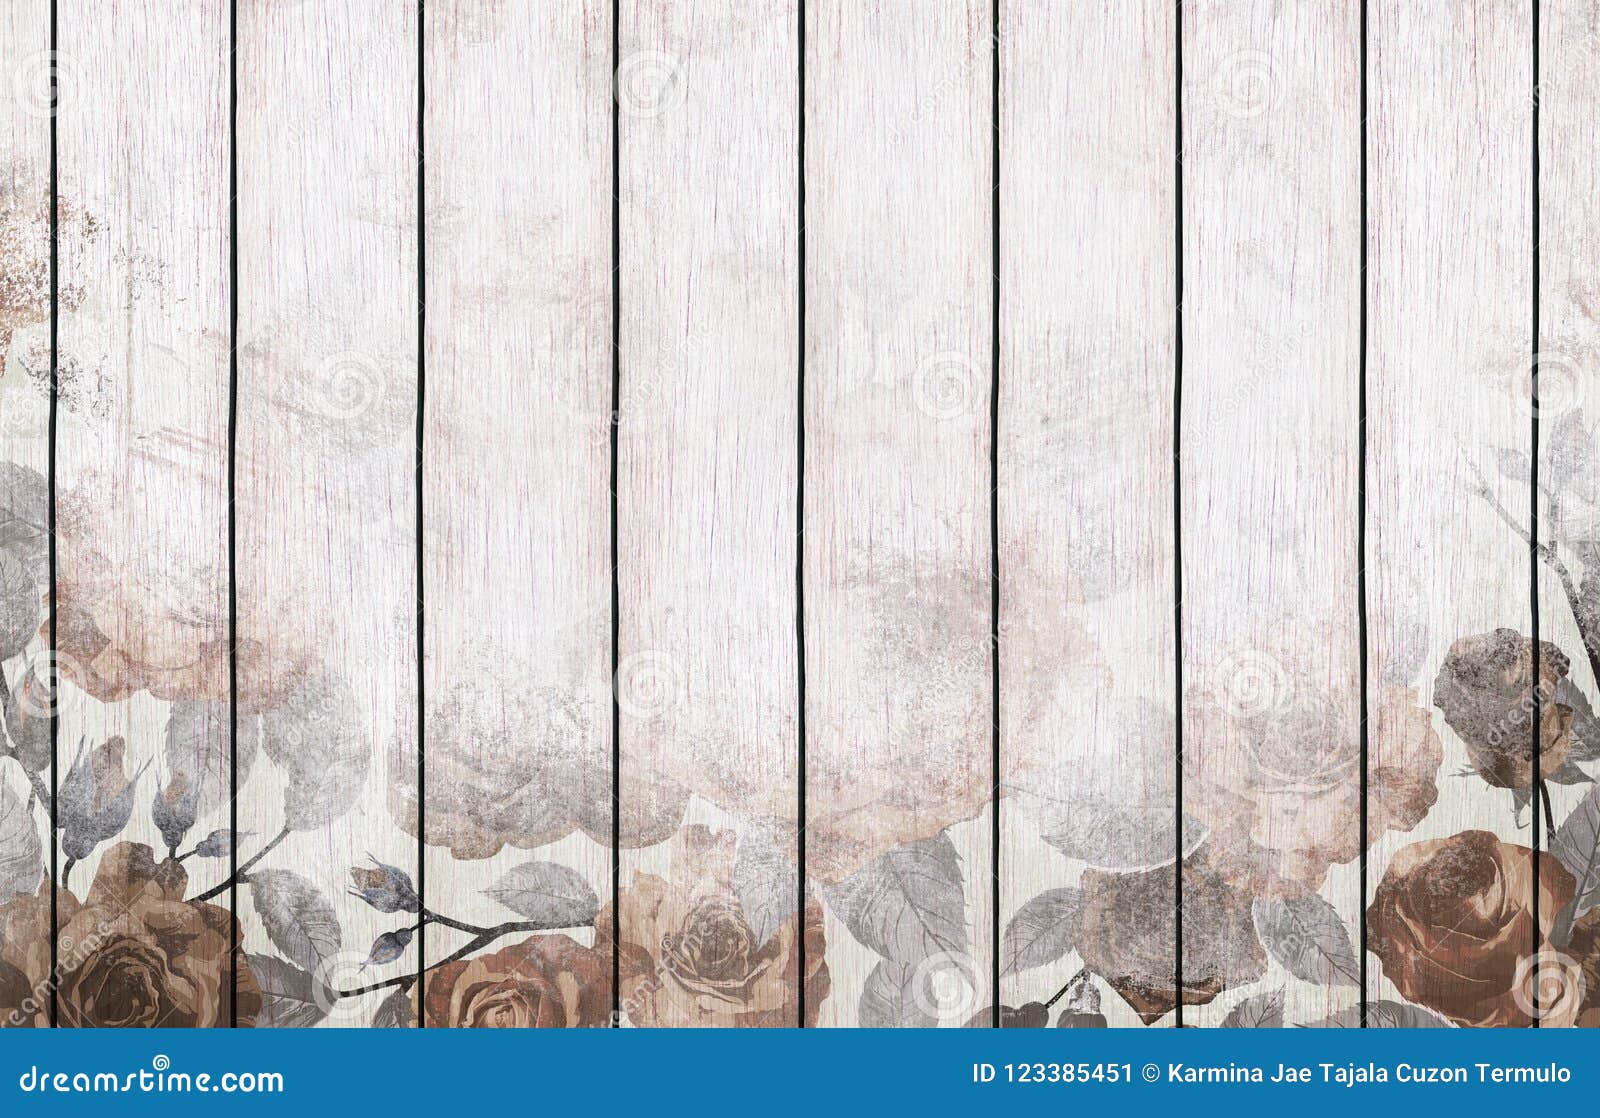 Painted Wood Background Wallpaper With Floral Design Stock Illustration Illustration Of Blue Construction 123385451